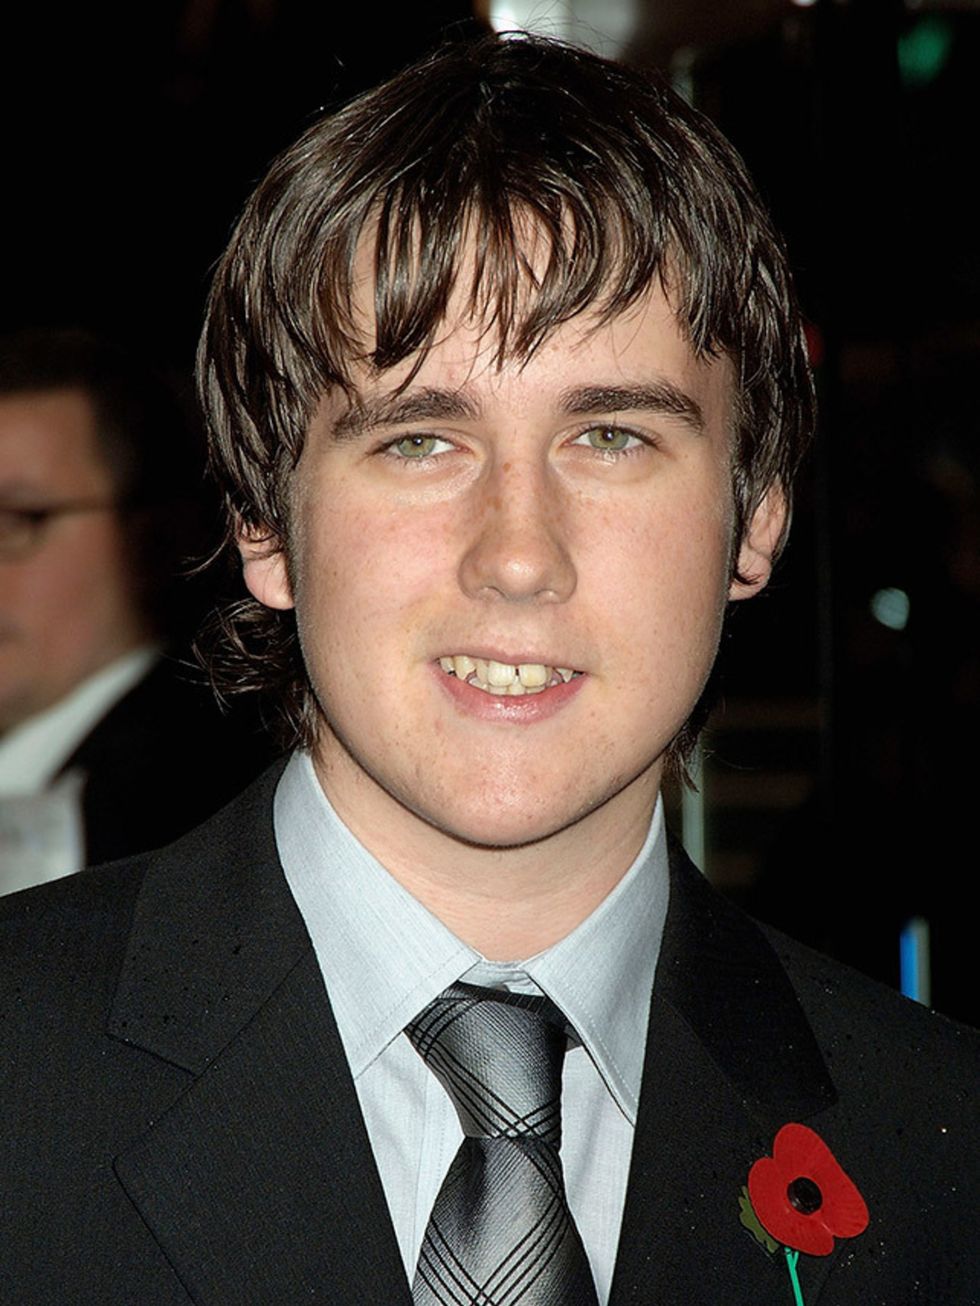 <p>Matthew Lewis, who plays Neville Longbottom in the Harry Potter series, at the world premiere of Harry Potter And The Goblet Of Fire in London, November 2005. </p>